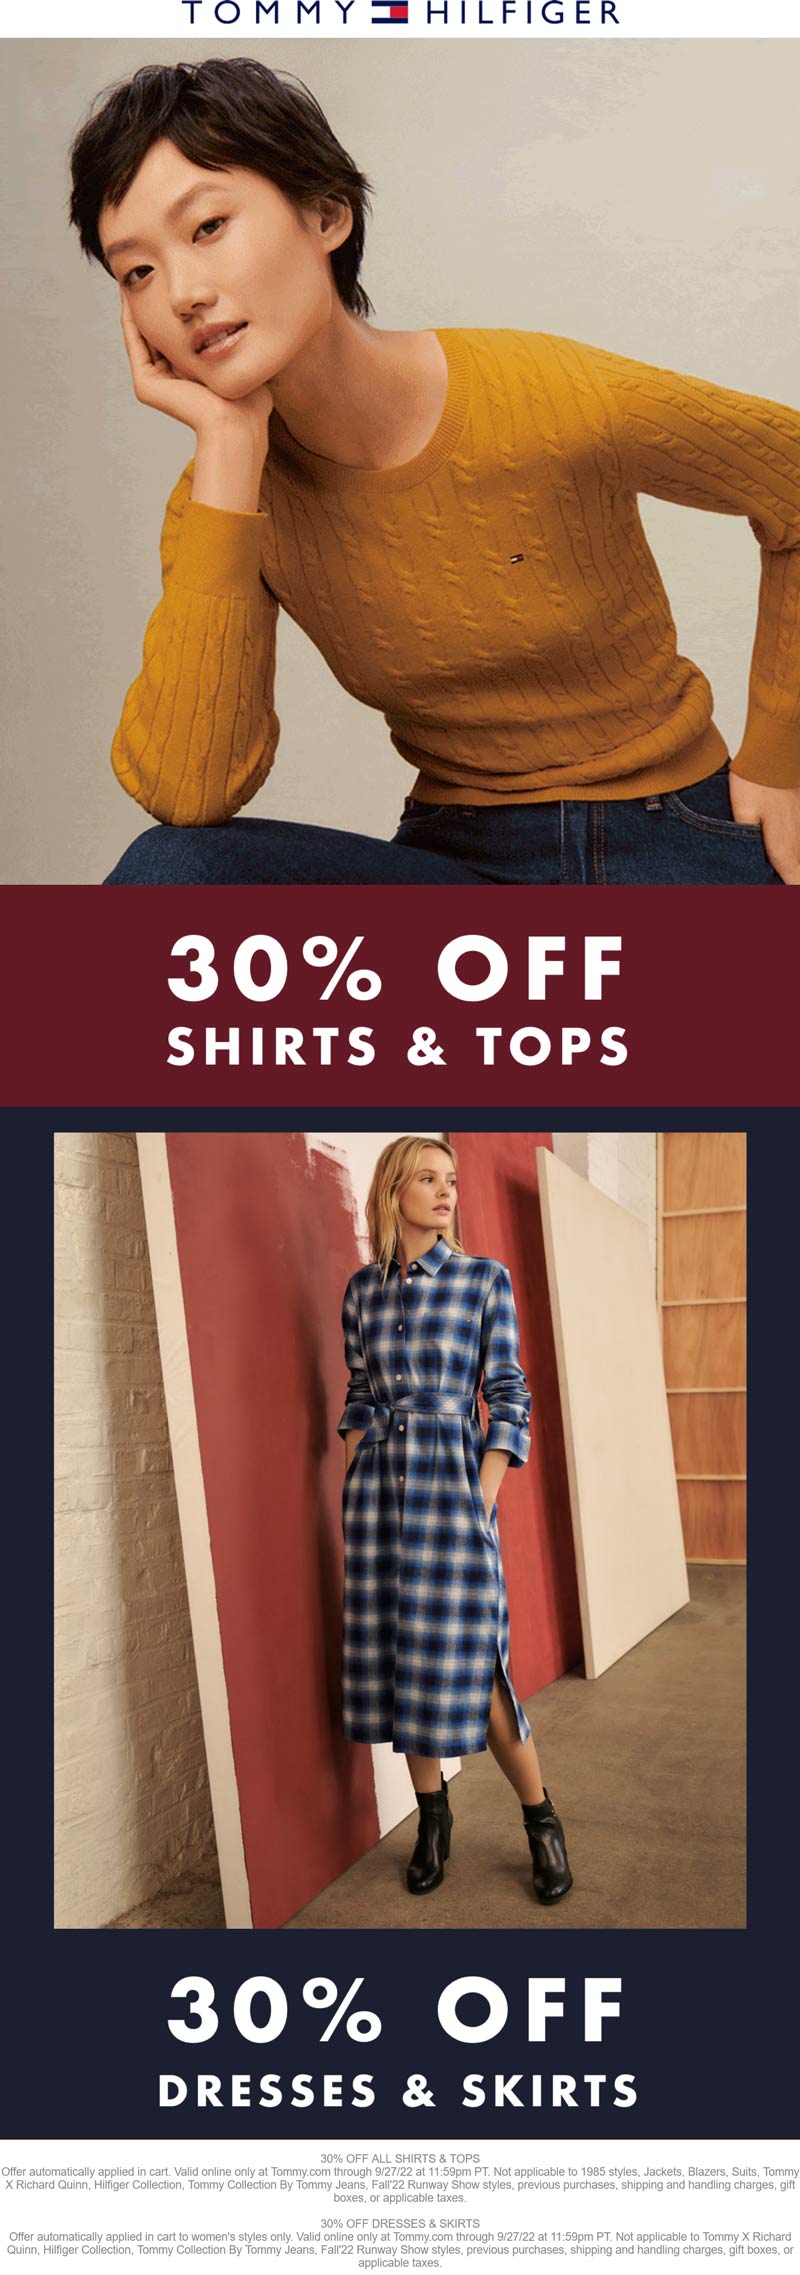 Tommy Hilfiger stores Coupon  30% off tops, skirts & dresses online at Tommy Hilfiger #tommyhilfiger 